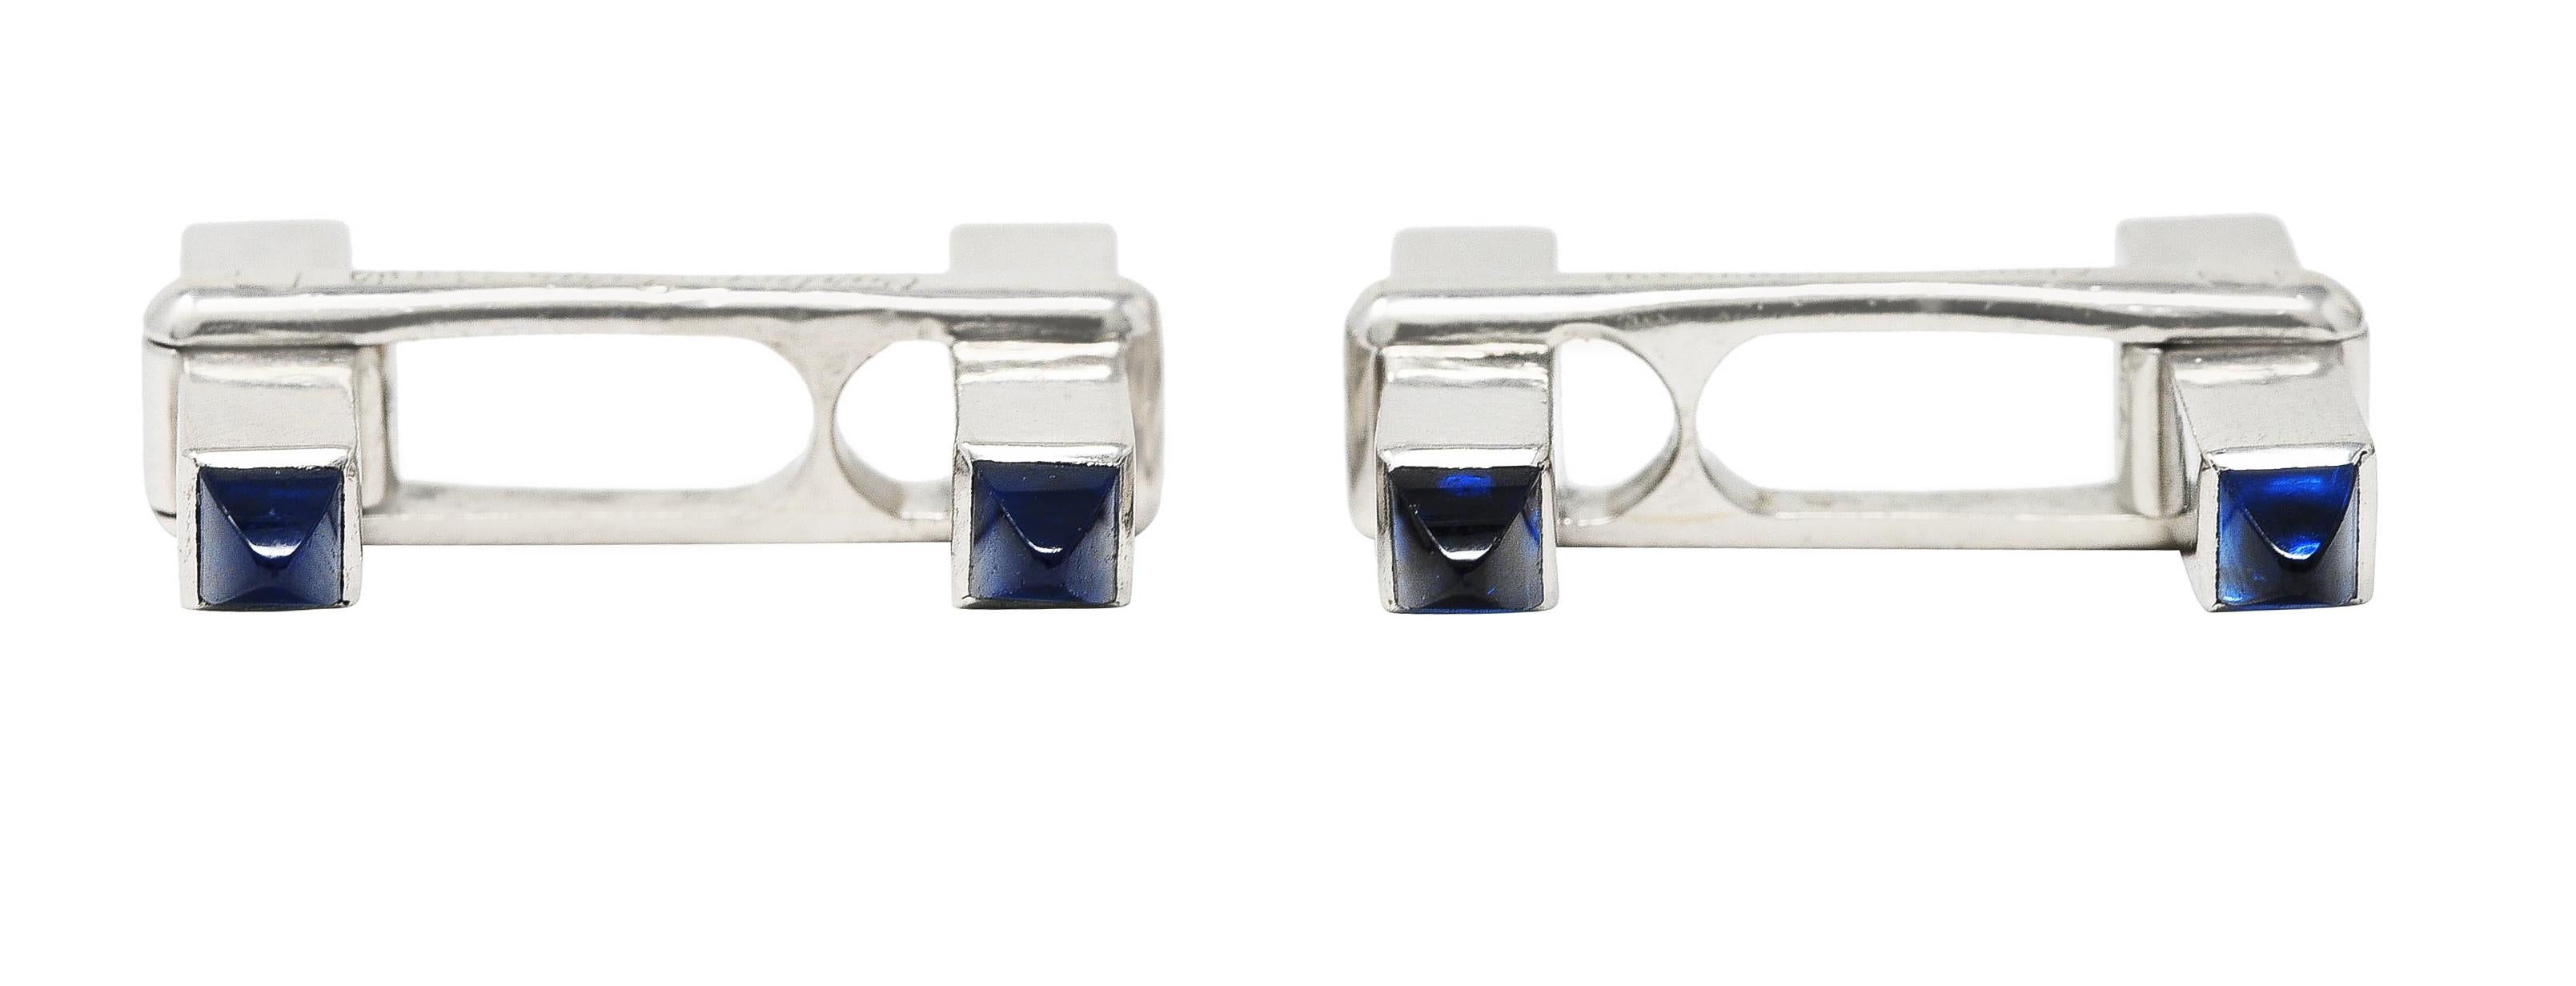 Designed as swivel style cufflinks comprised of rectangular bars. Terminating with carved pyramid shaped sapphire cabochons. Measuring 3.0 x 3.5 mm - transparent light to medium blue. Completed by high polished finish. Stamped with French hallmarks